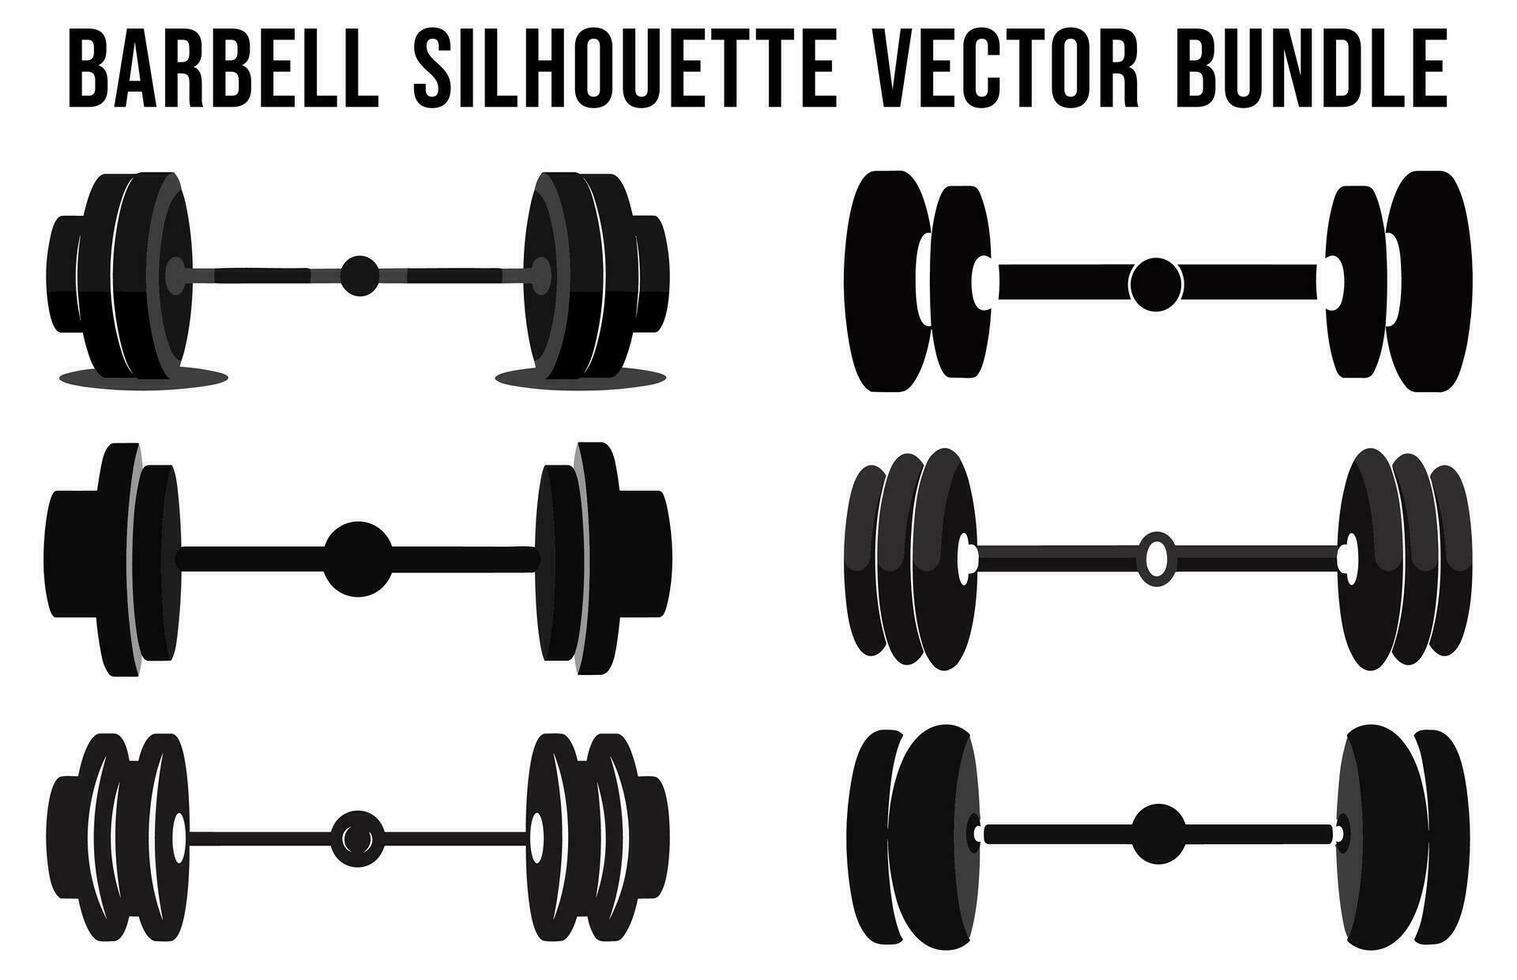 Gym Barbell Silhouette Vector Bundle, Fitness equirement element silhouettes